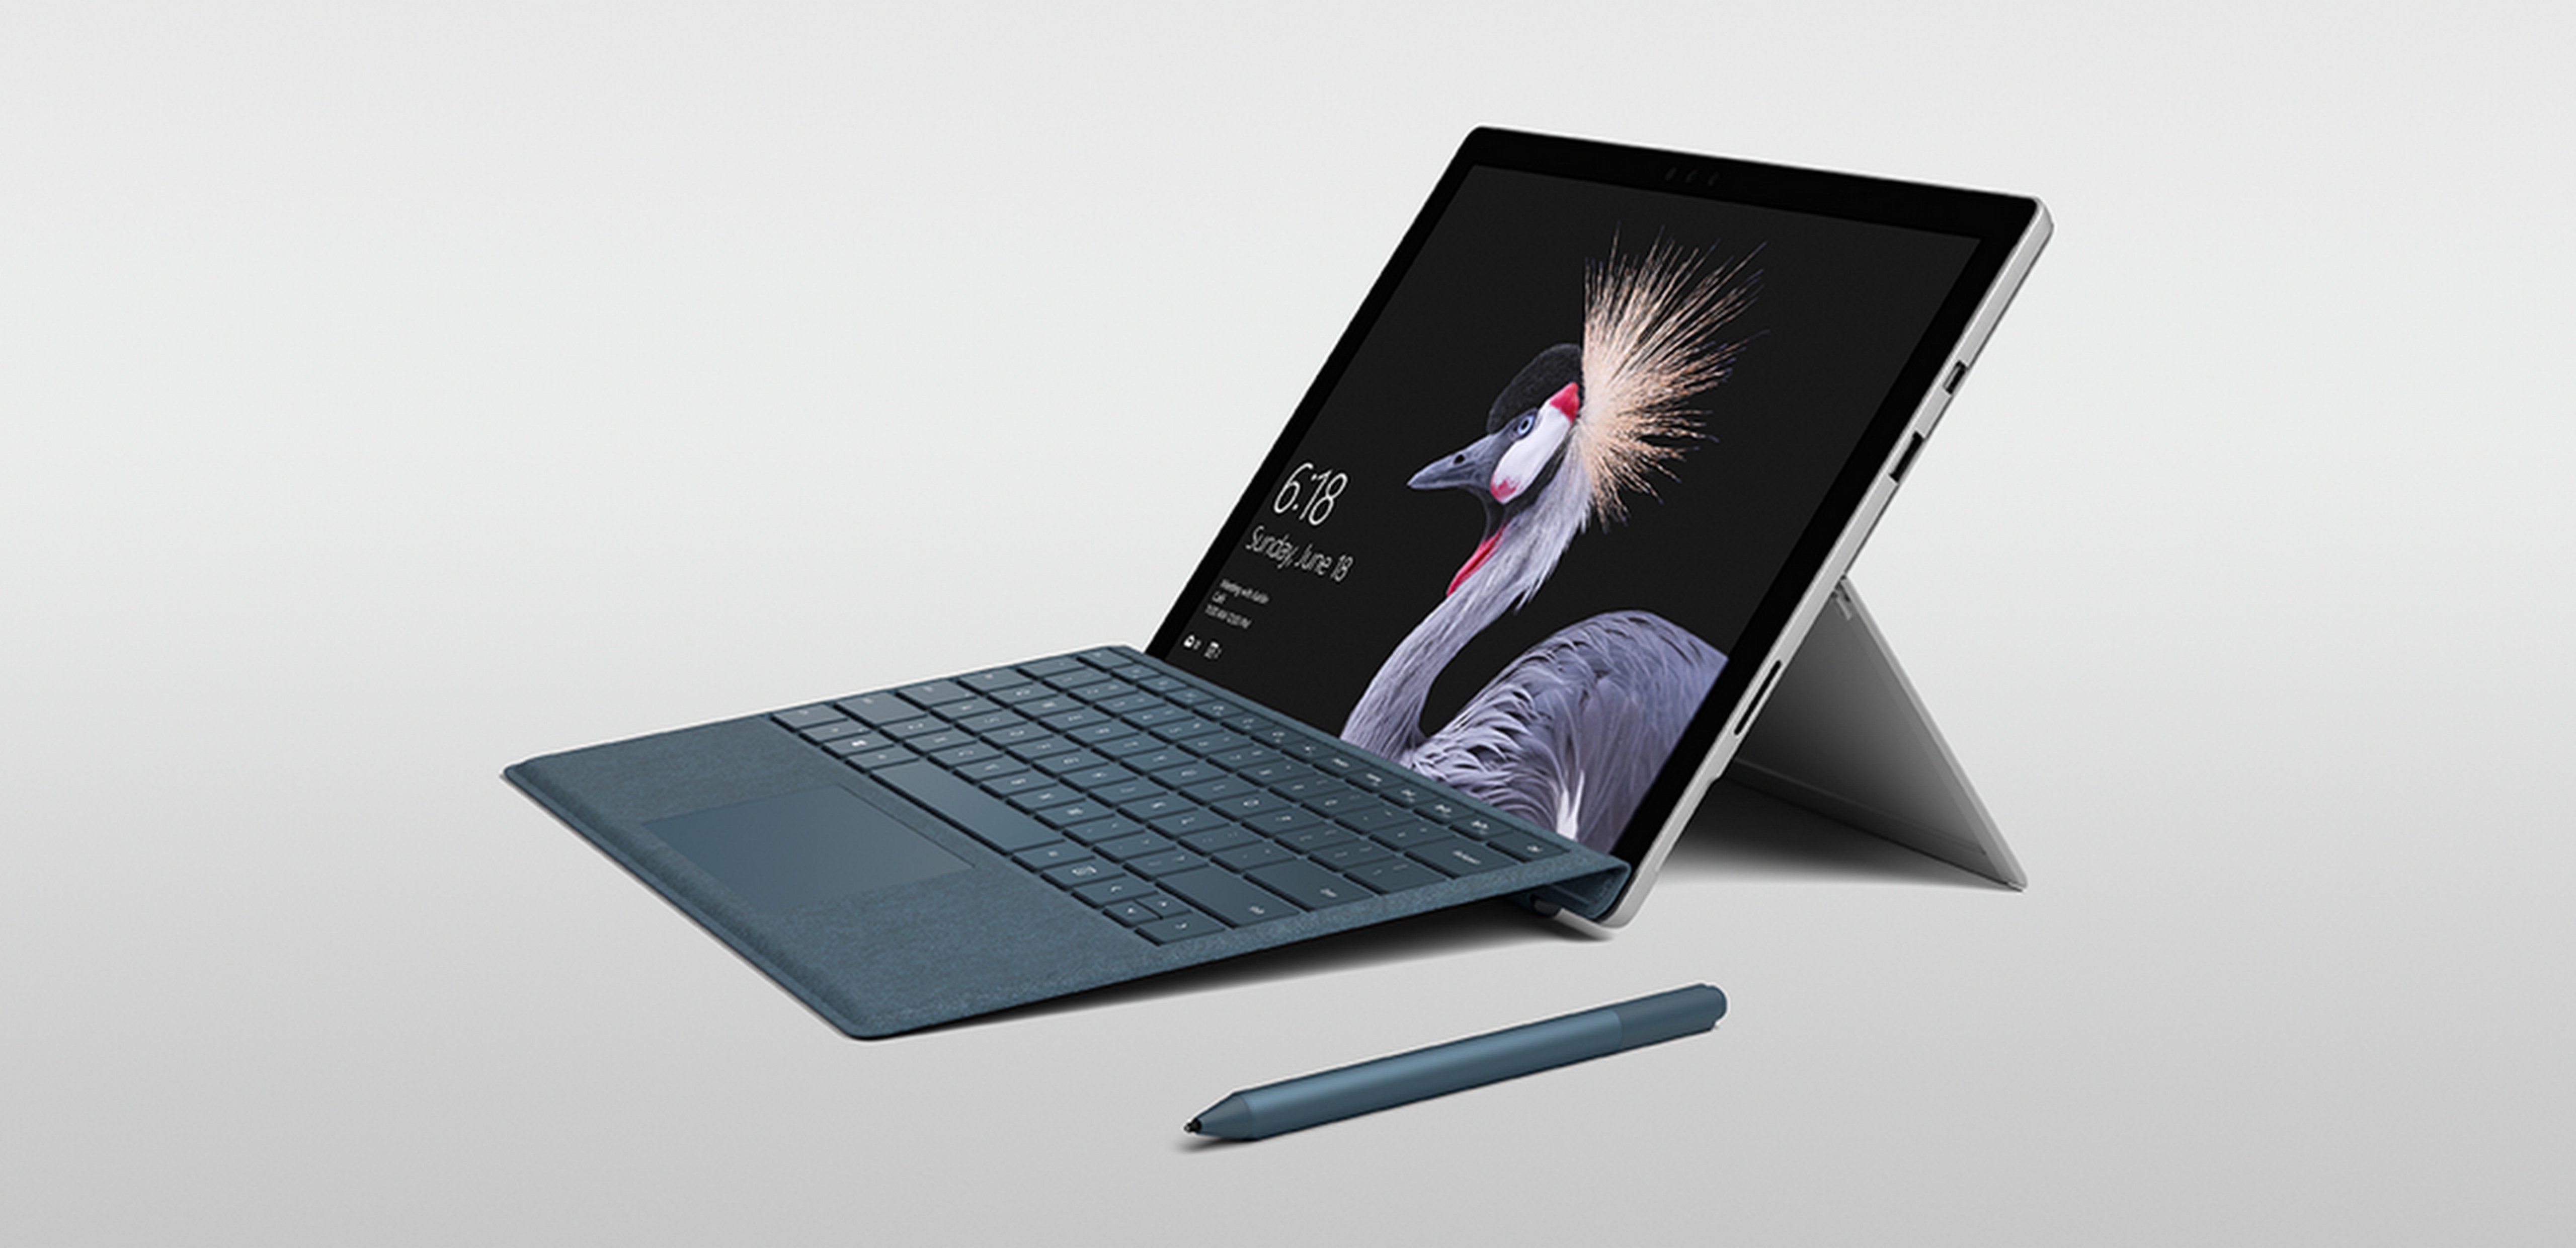 The new Surface Pro with Surface Pen.